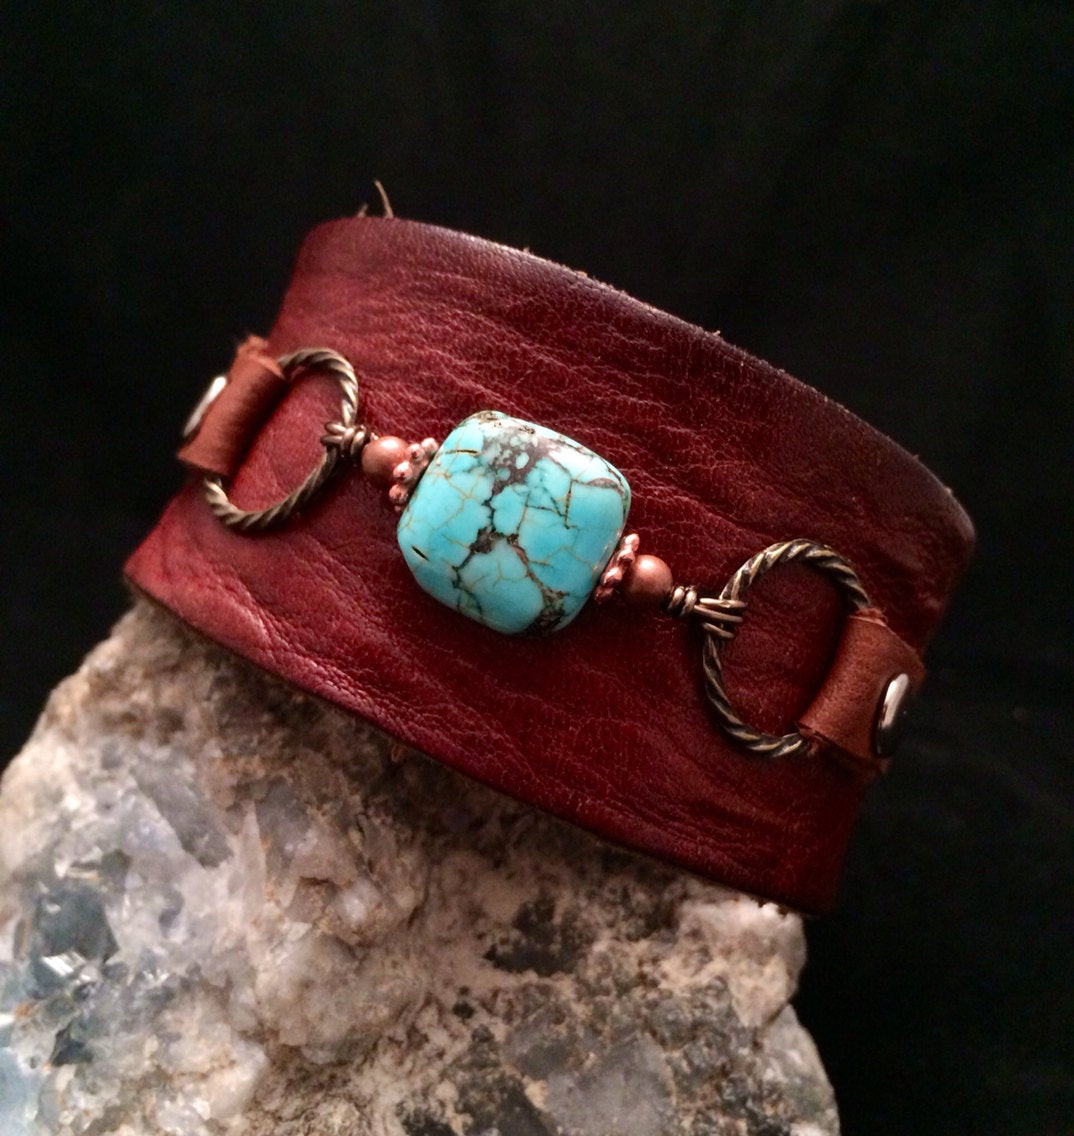 One Of A Kind Bracelet
 Handmade one of a kind leather cuff bracelet with turquoise